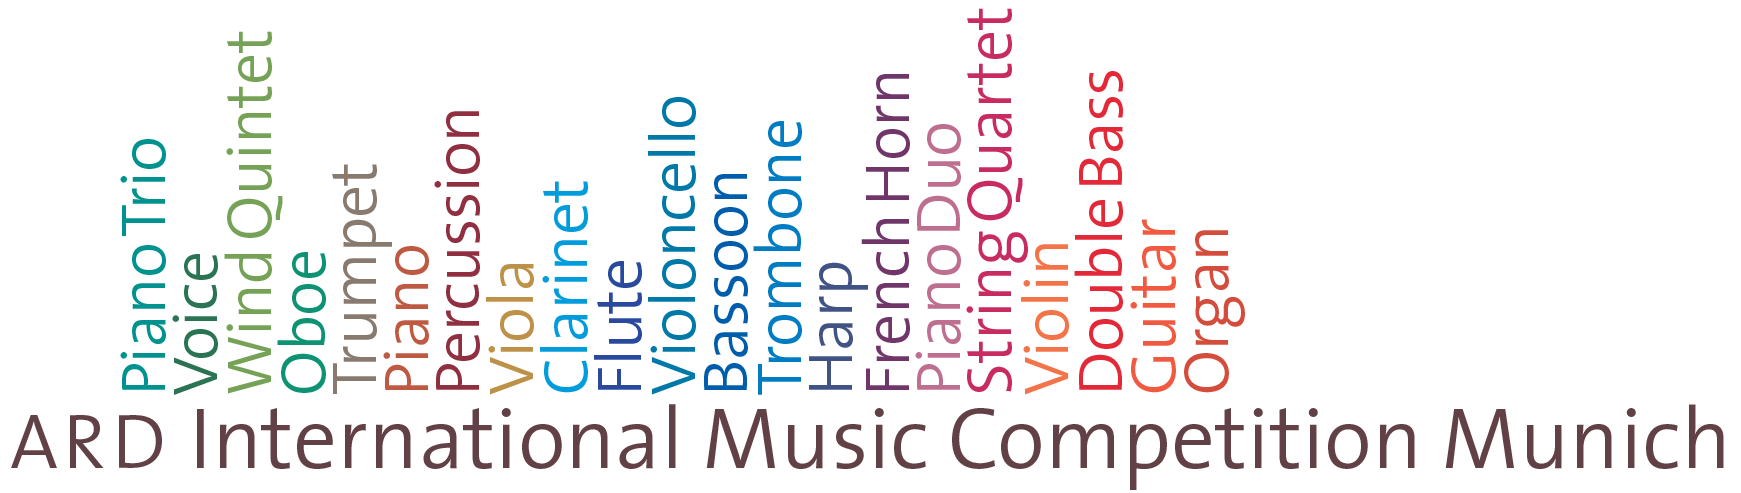 /assets/contentimages/ARD_International_Music_Competition.png